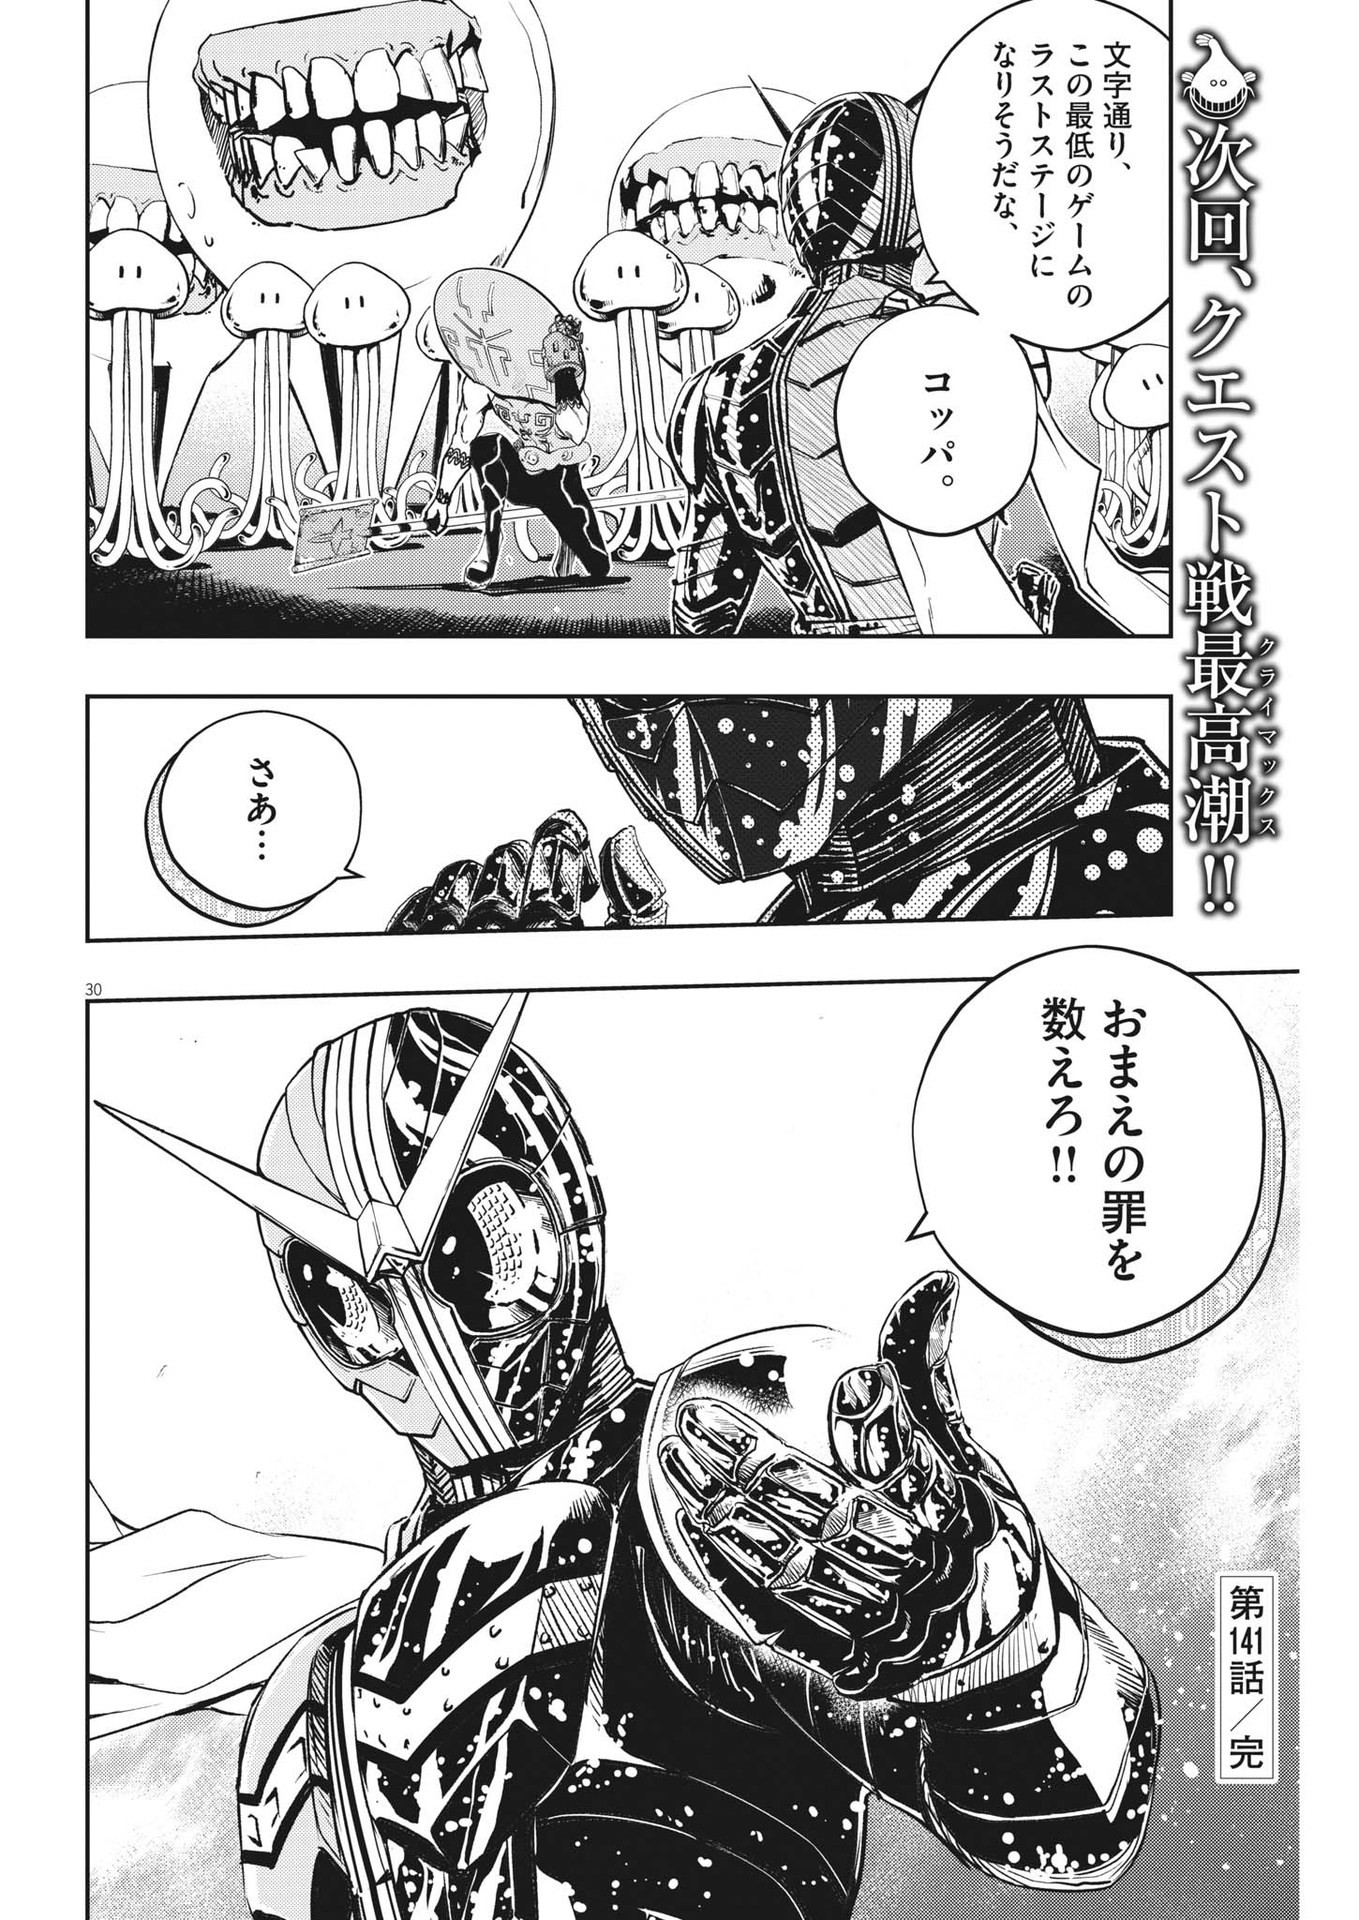 Kamen Rider W: Fuuto Tantei - Chapter 141 - Page 30